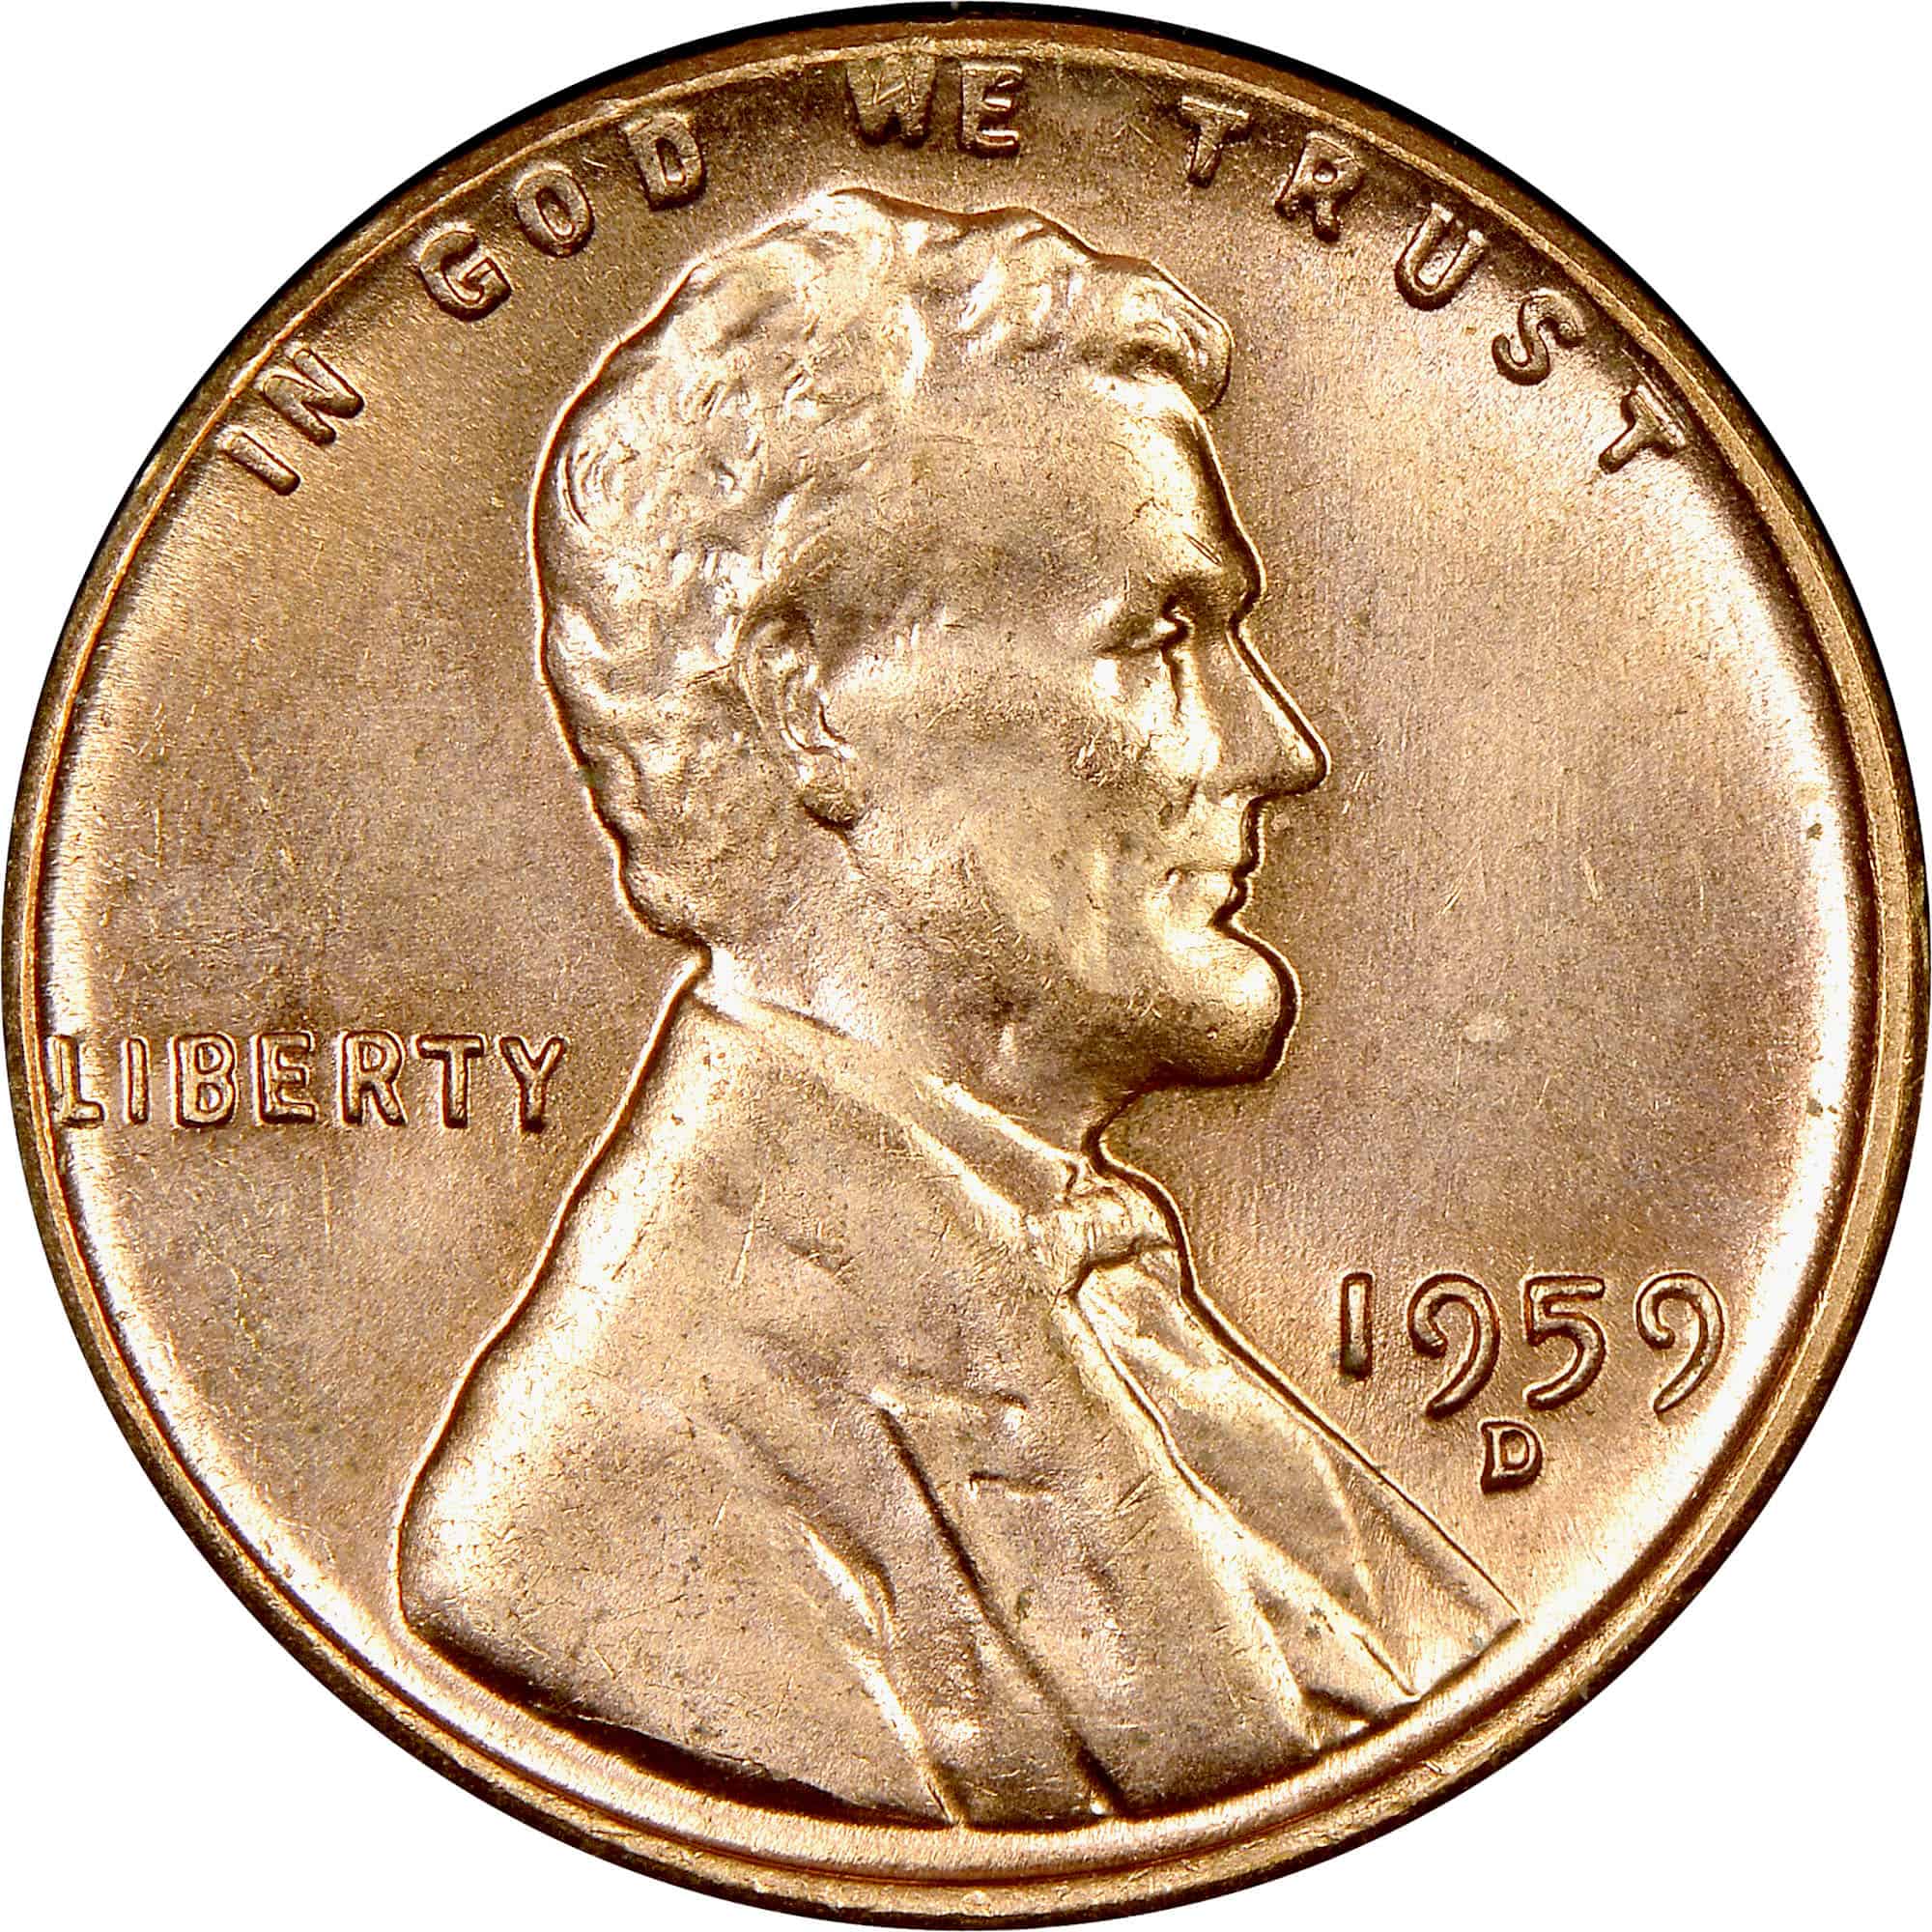 The obverse of the 1959 Lincoln penny